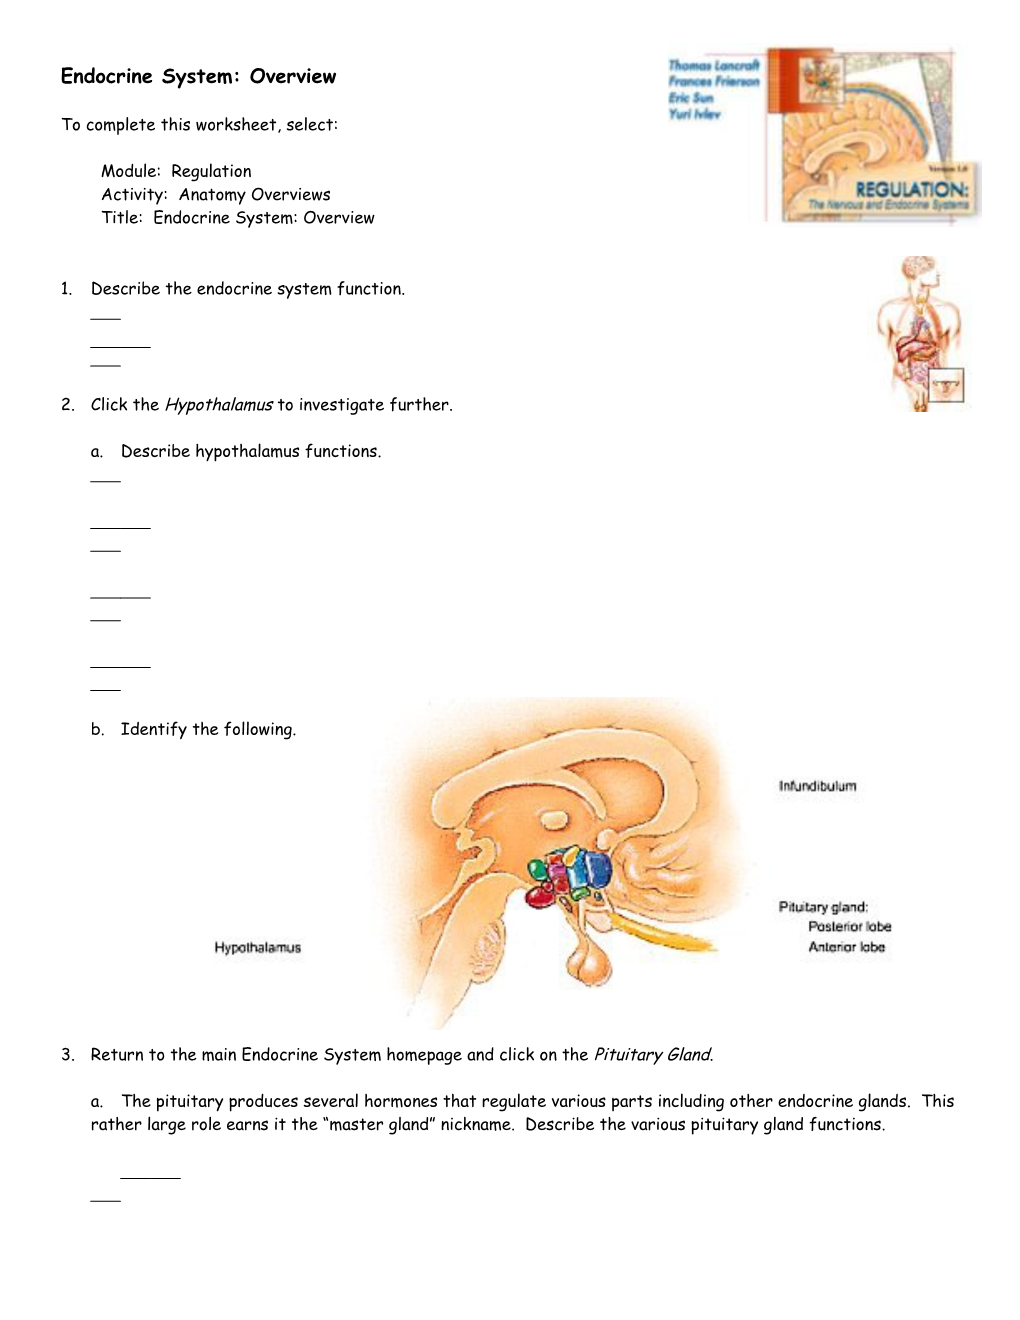 Endocrine System: Overview s3